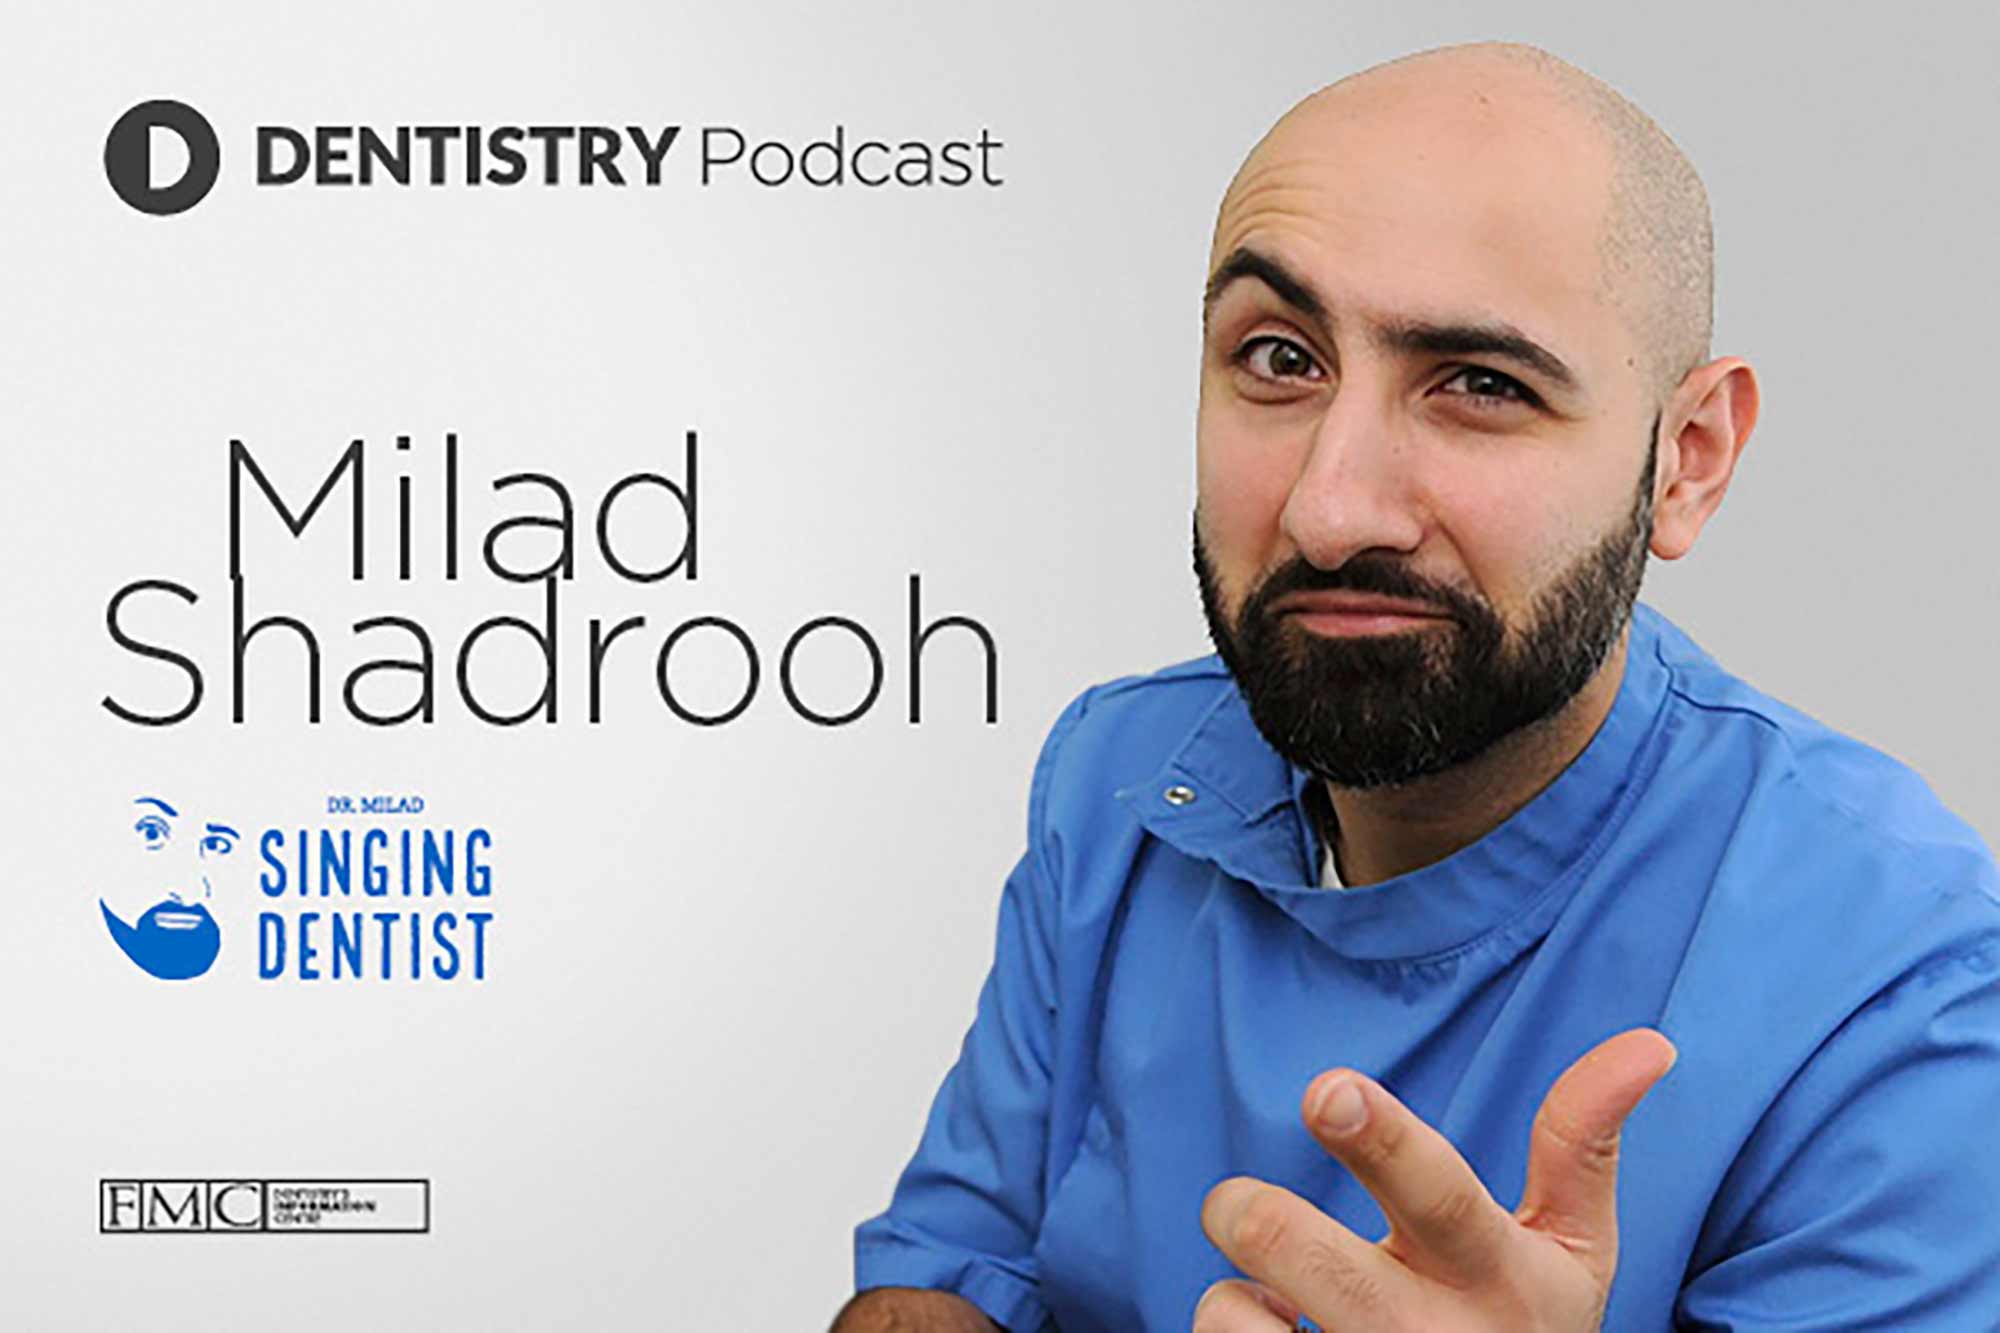 The Singing Dentist – also known as Dr Milad Shadrooh – is the eighth guest on the Dentistry Podcast